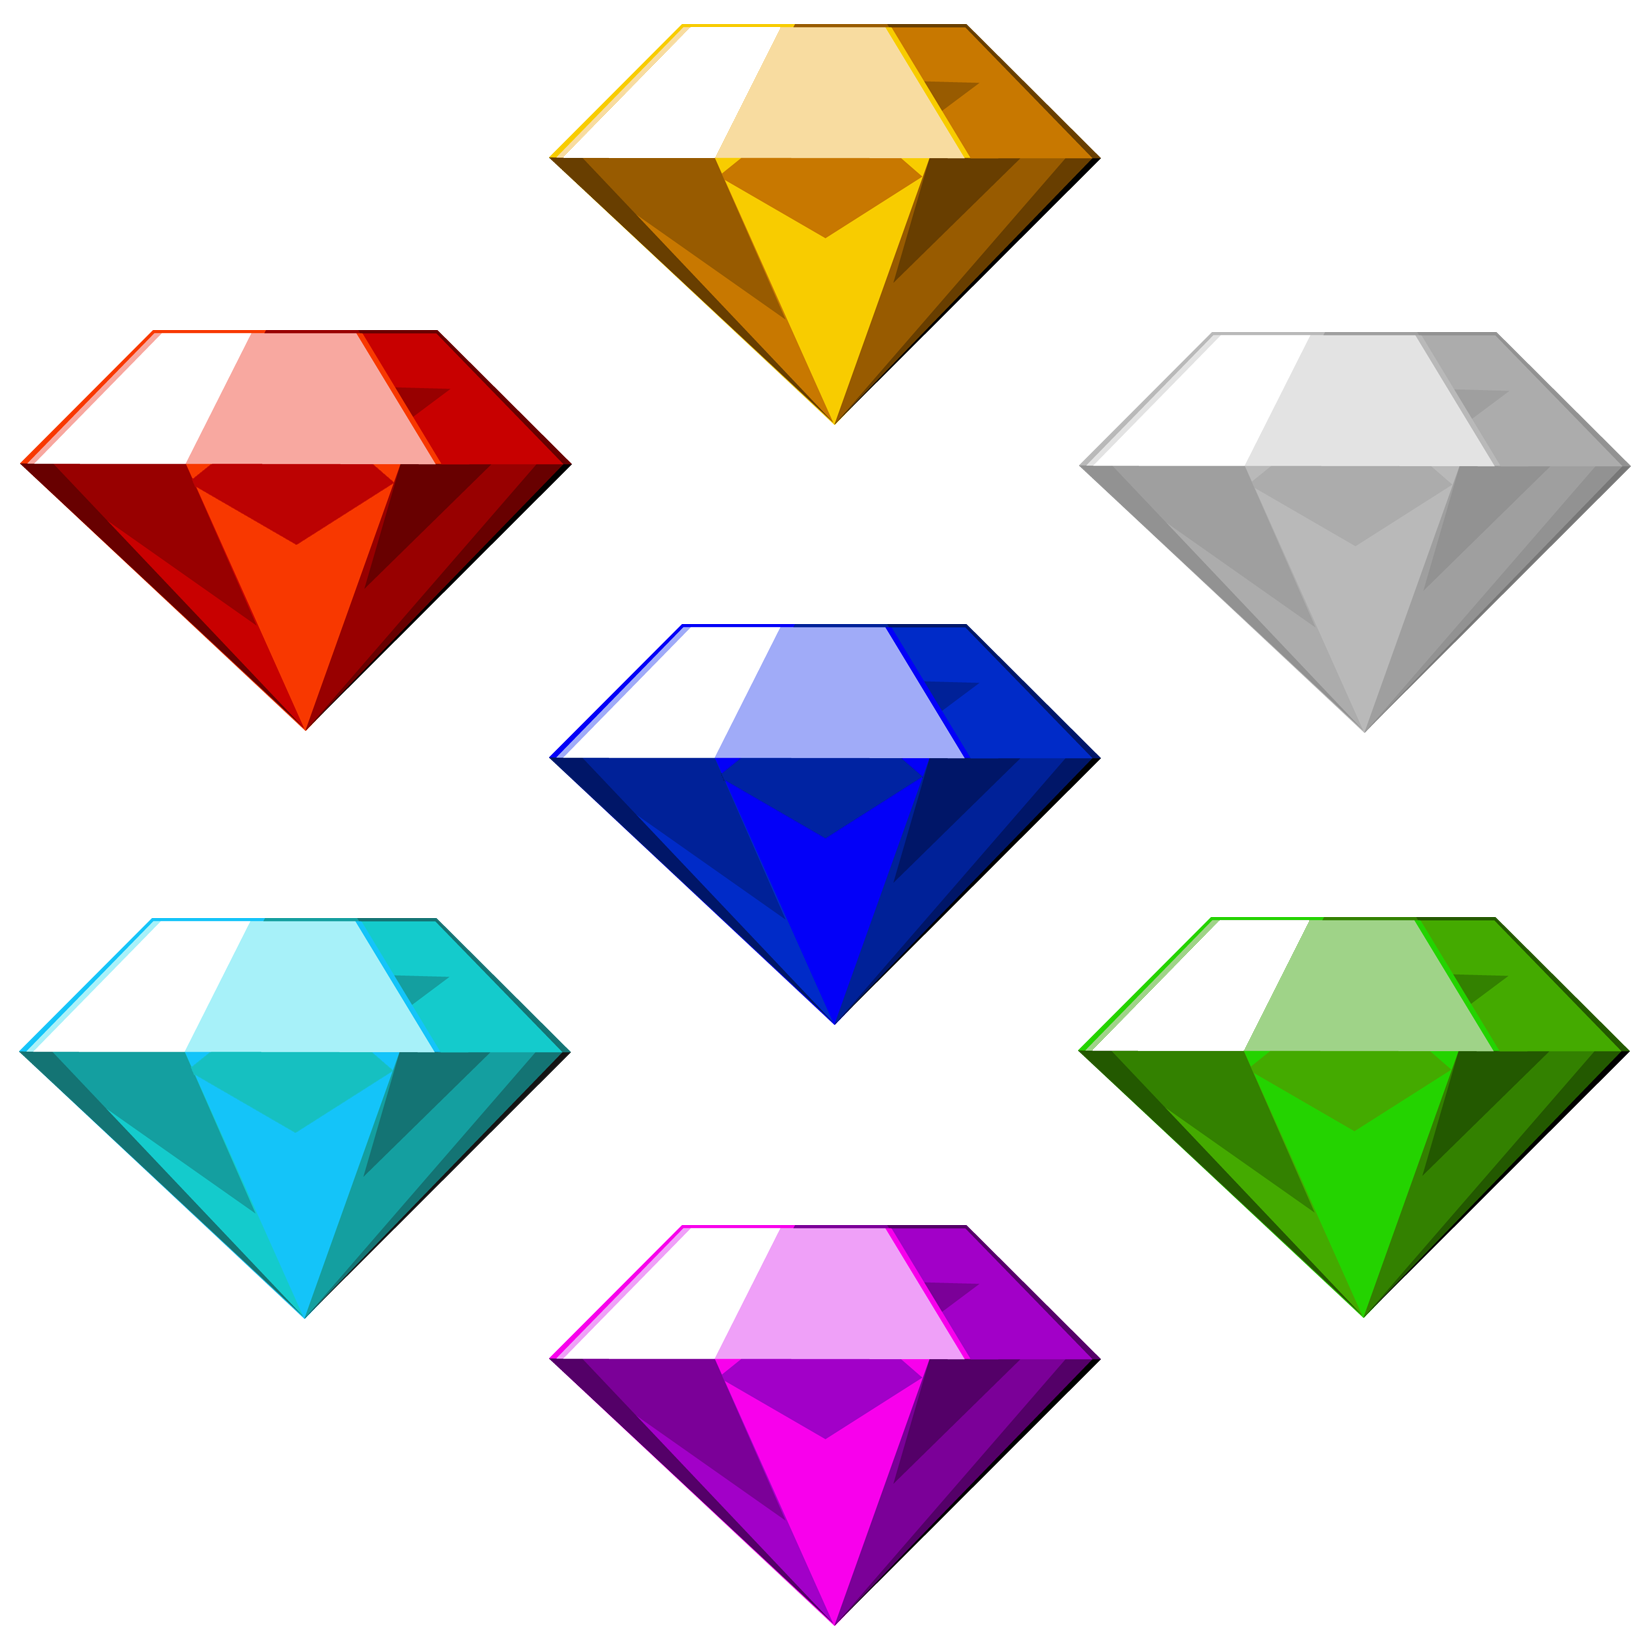 sonic chaos emeralds real